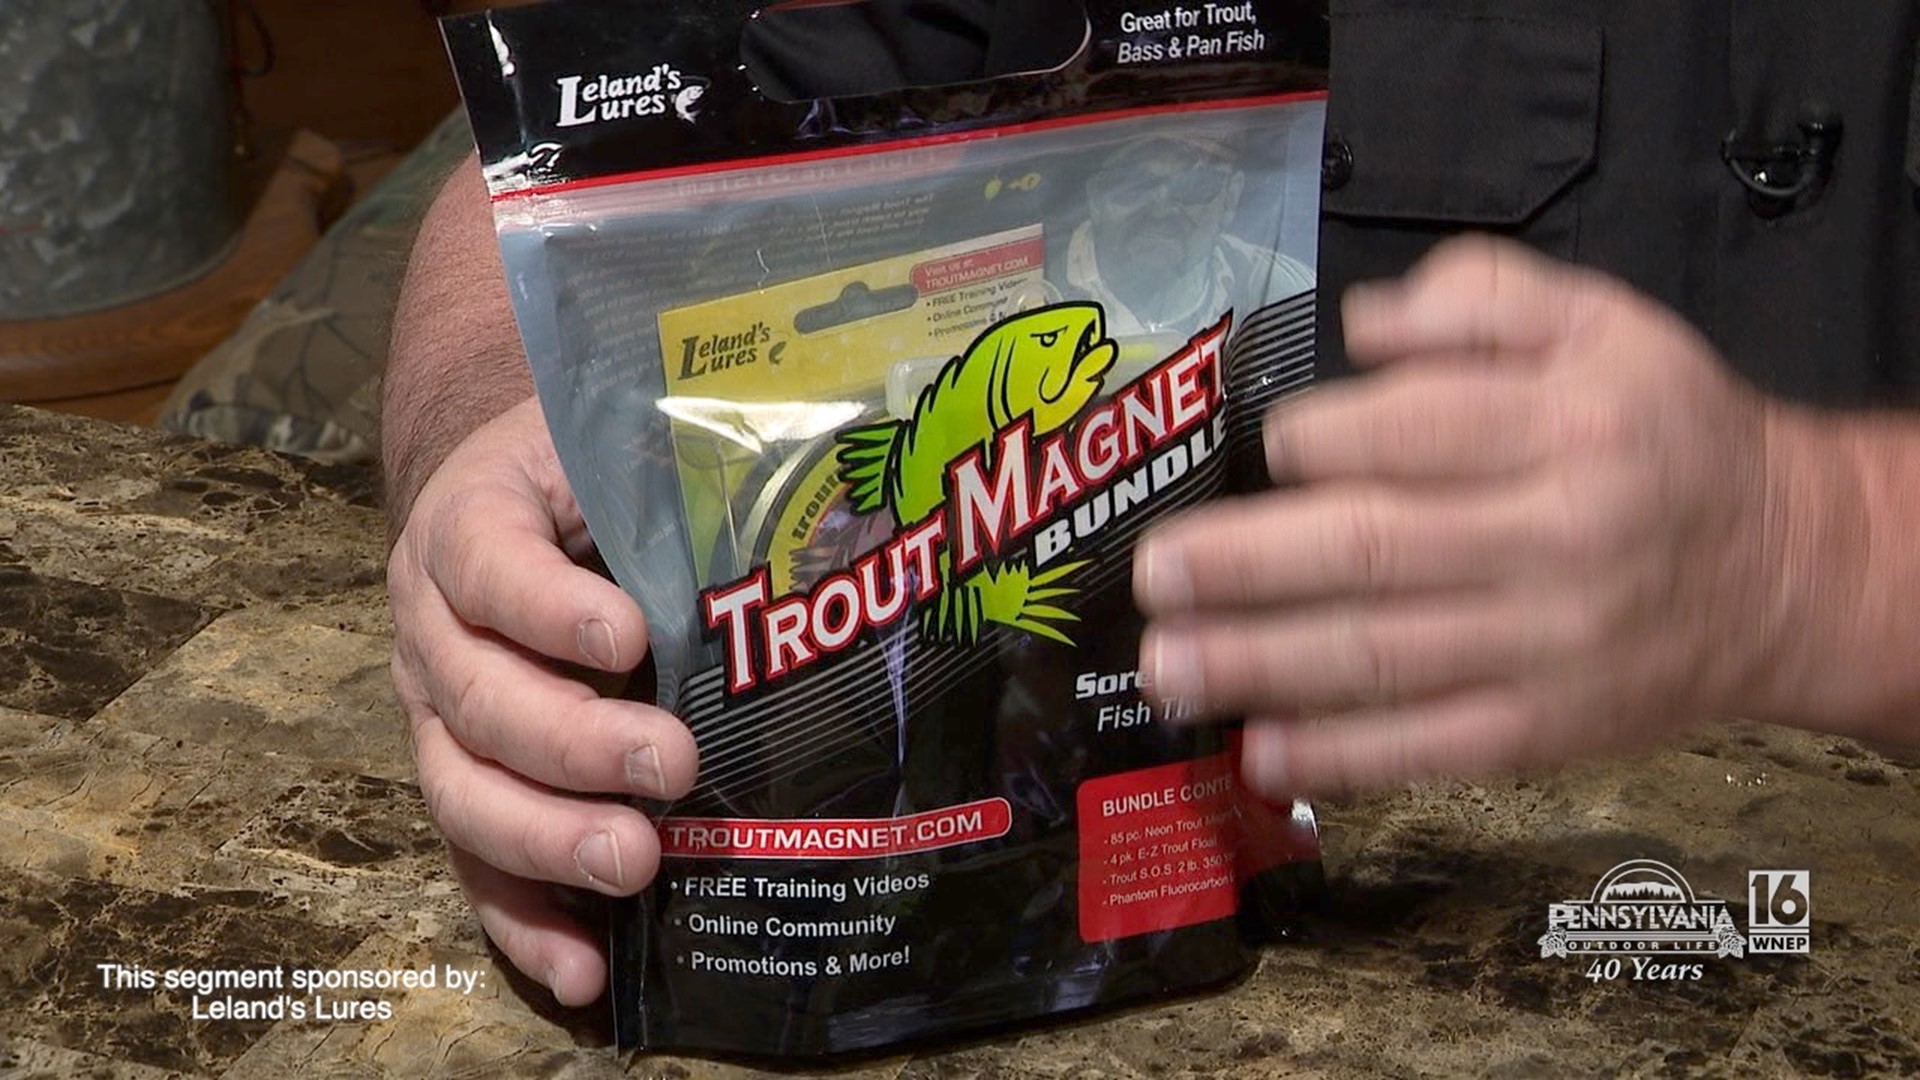 Trout Magnet Product Giveaway